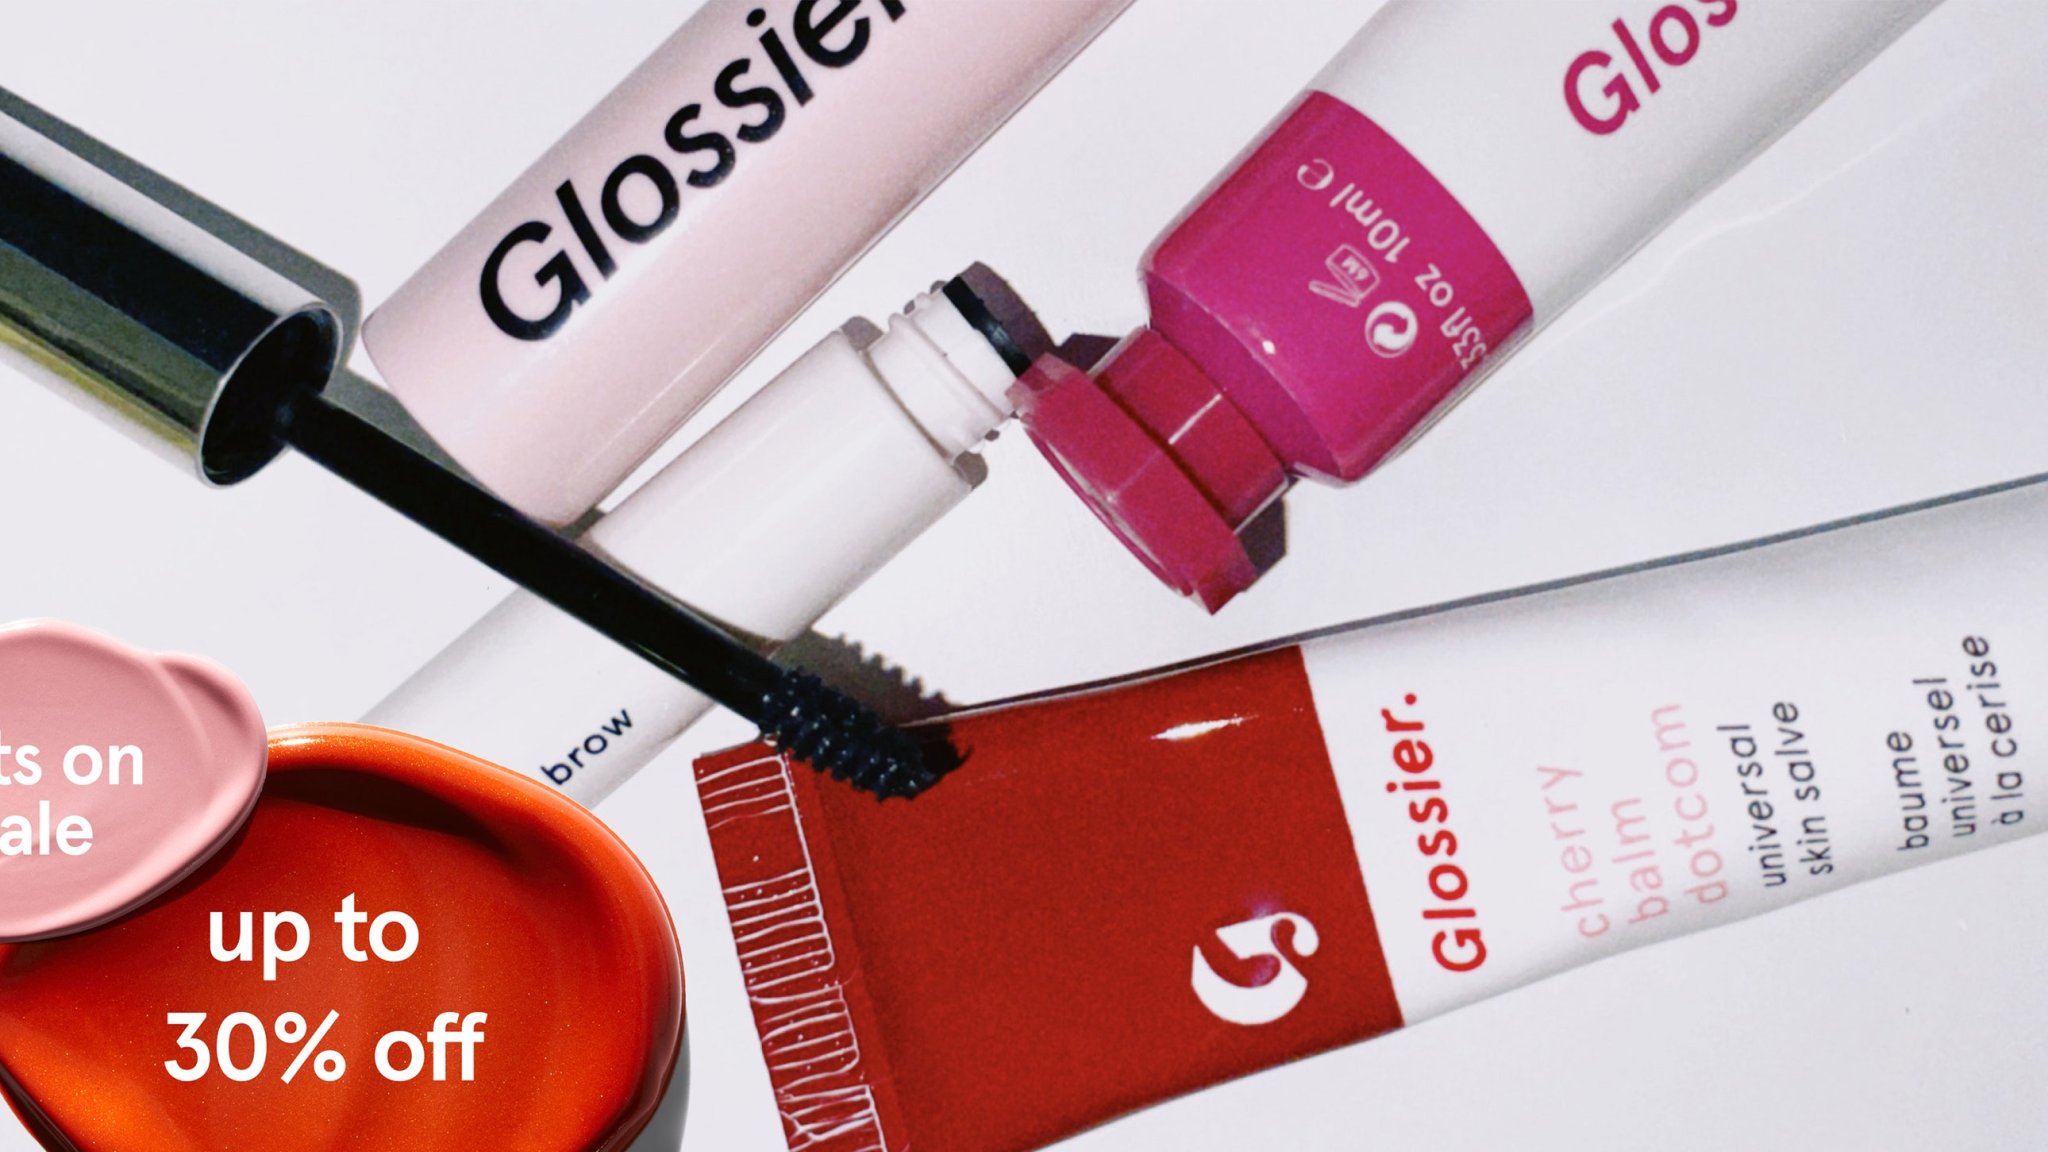 The Glossier Cyber Monday sale is almost over, so fill your boots with Cloud Paint at 30% off